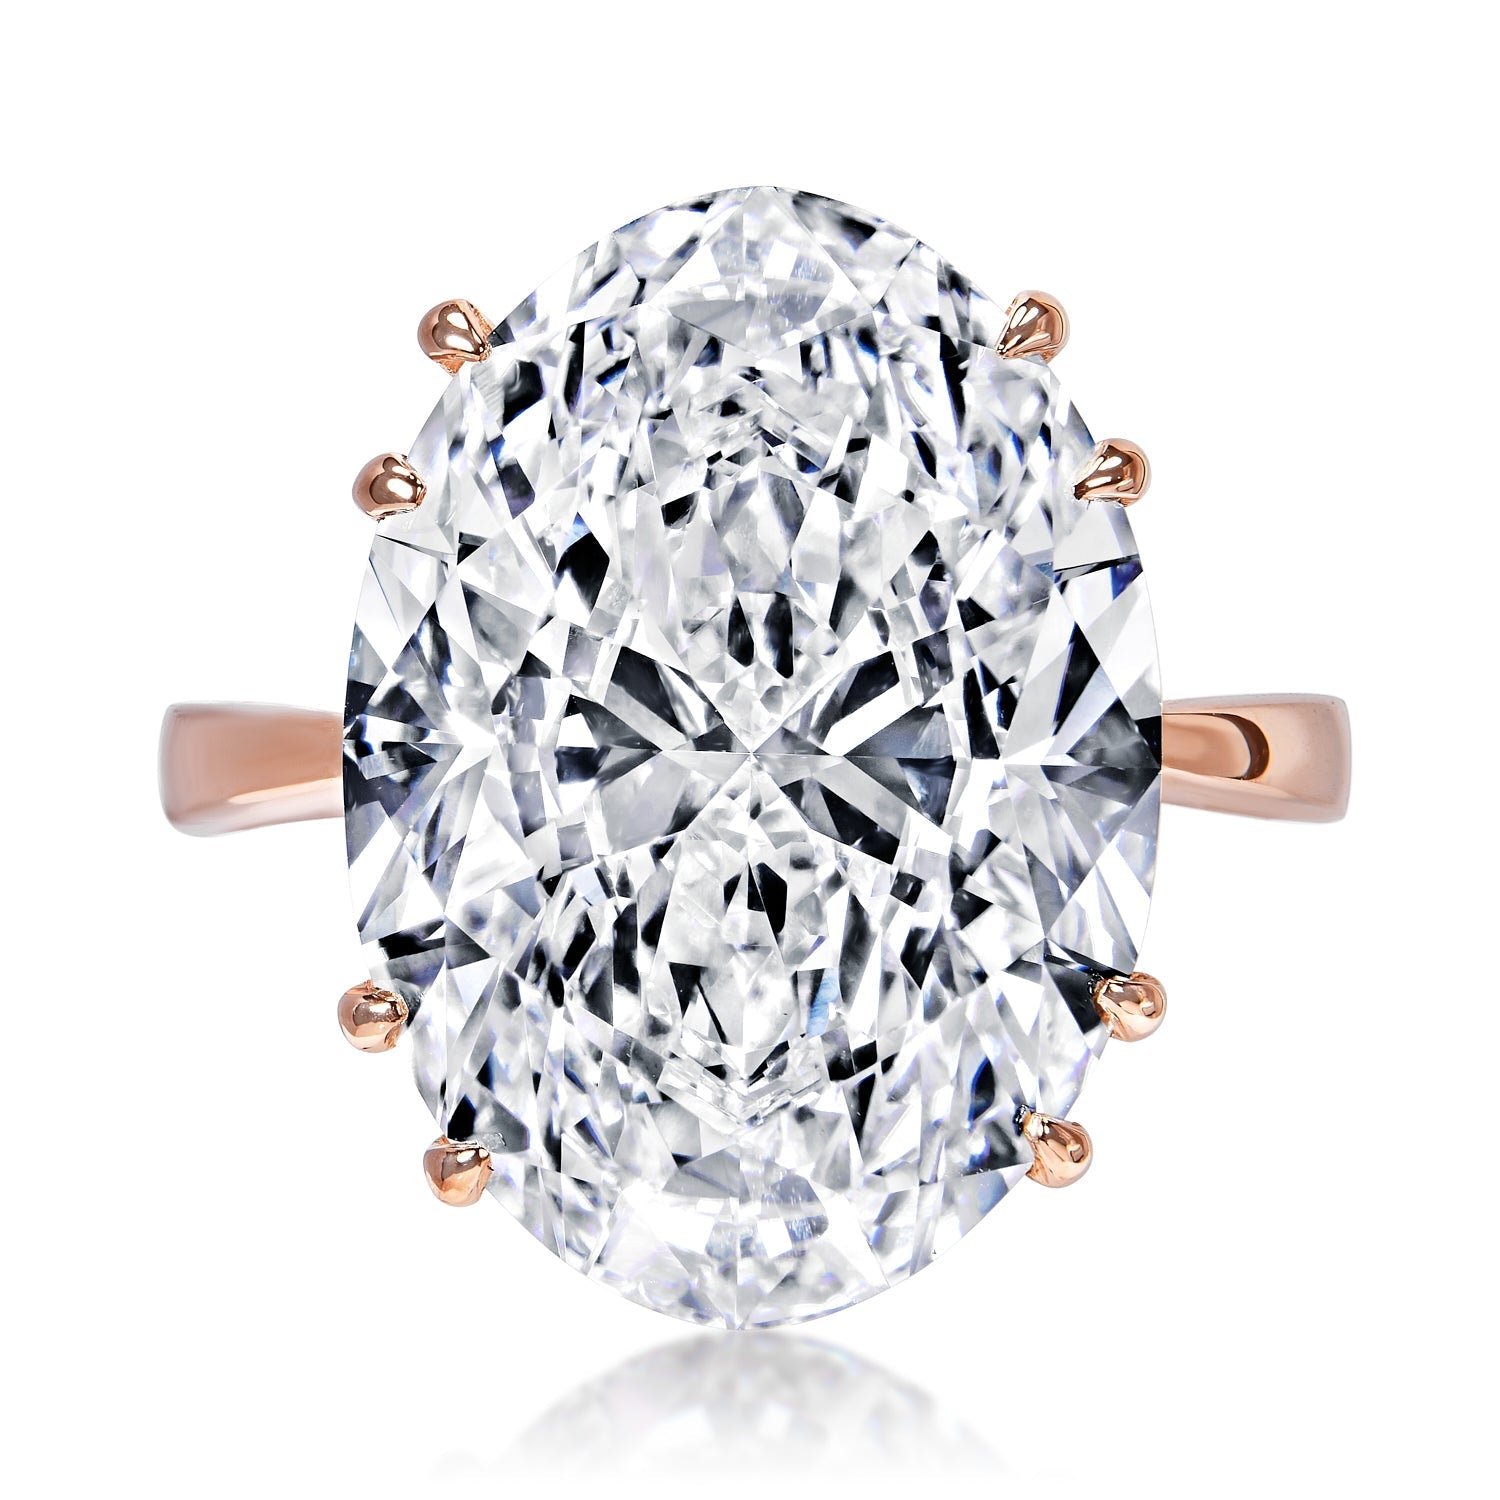 Lucinda 15 Carats D VS1 Oval Cut Lab Grown Diamond Engagement Ring in 18k Rose Gold Front View